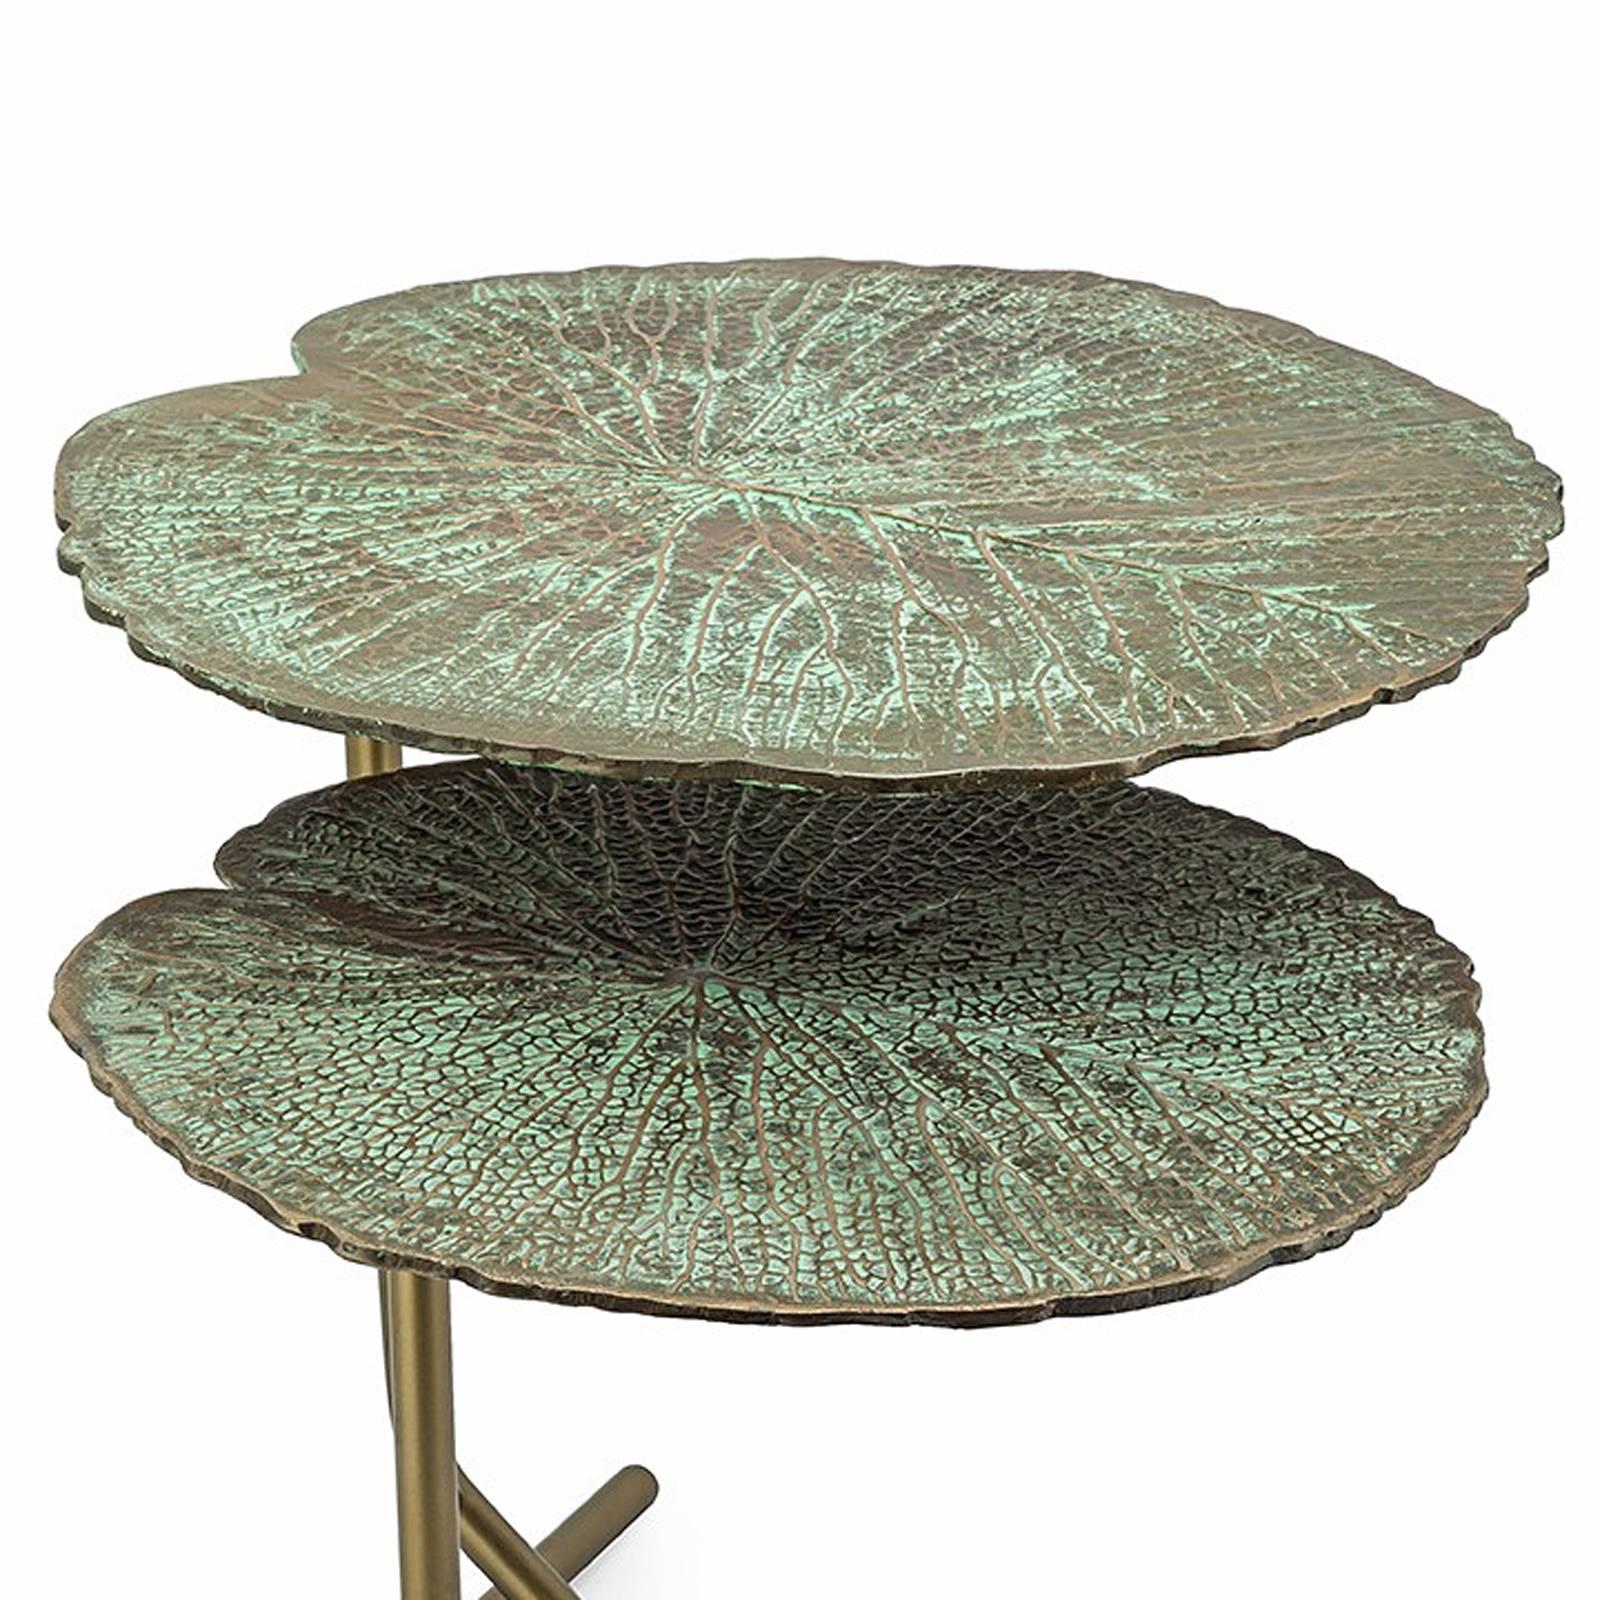 Side table set of two lotus leaves, with 
structure in metal, in old bronze finish style. 
A/ Ø49xH53cm.
B/ Ø41xH45cm.
